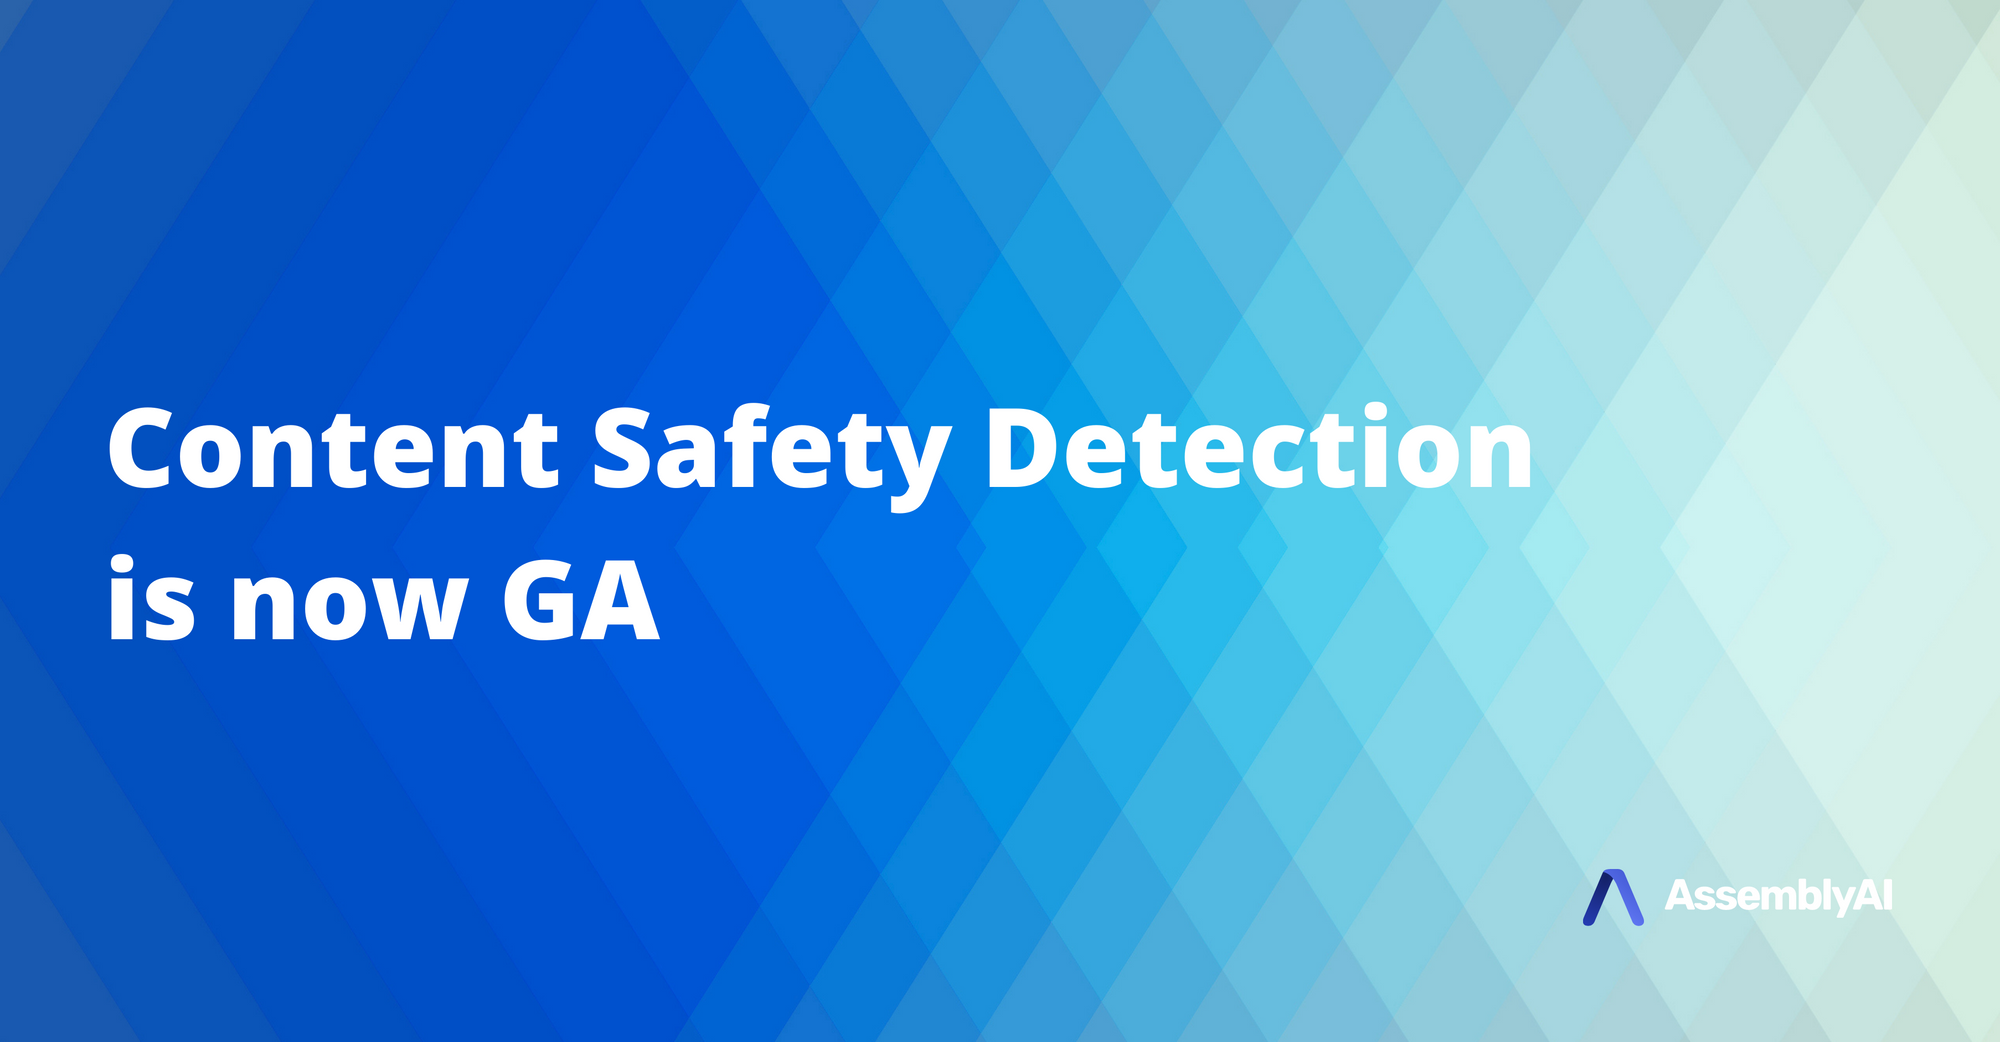 Content Safety Detection is now GA!